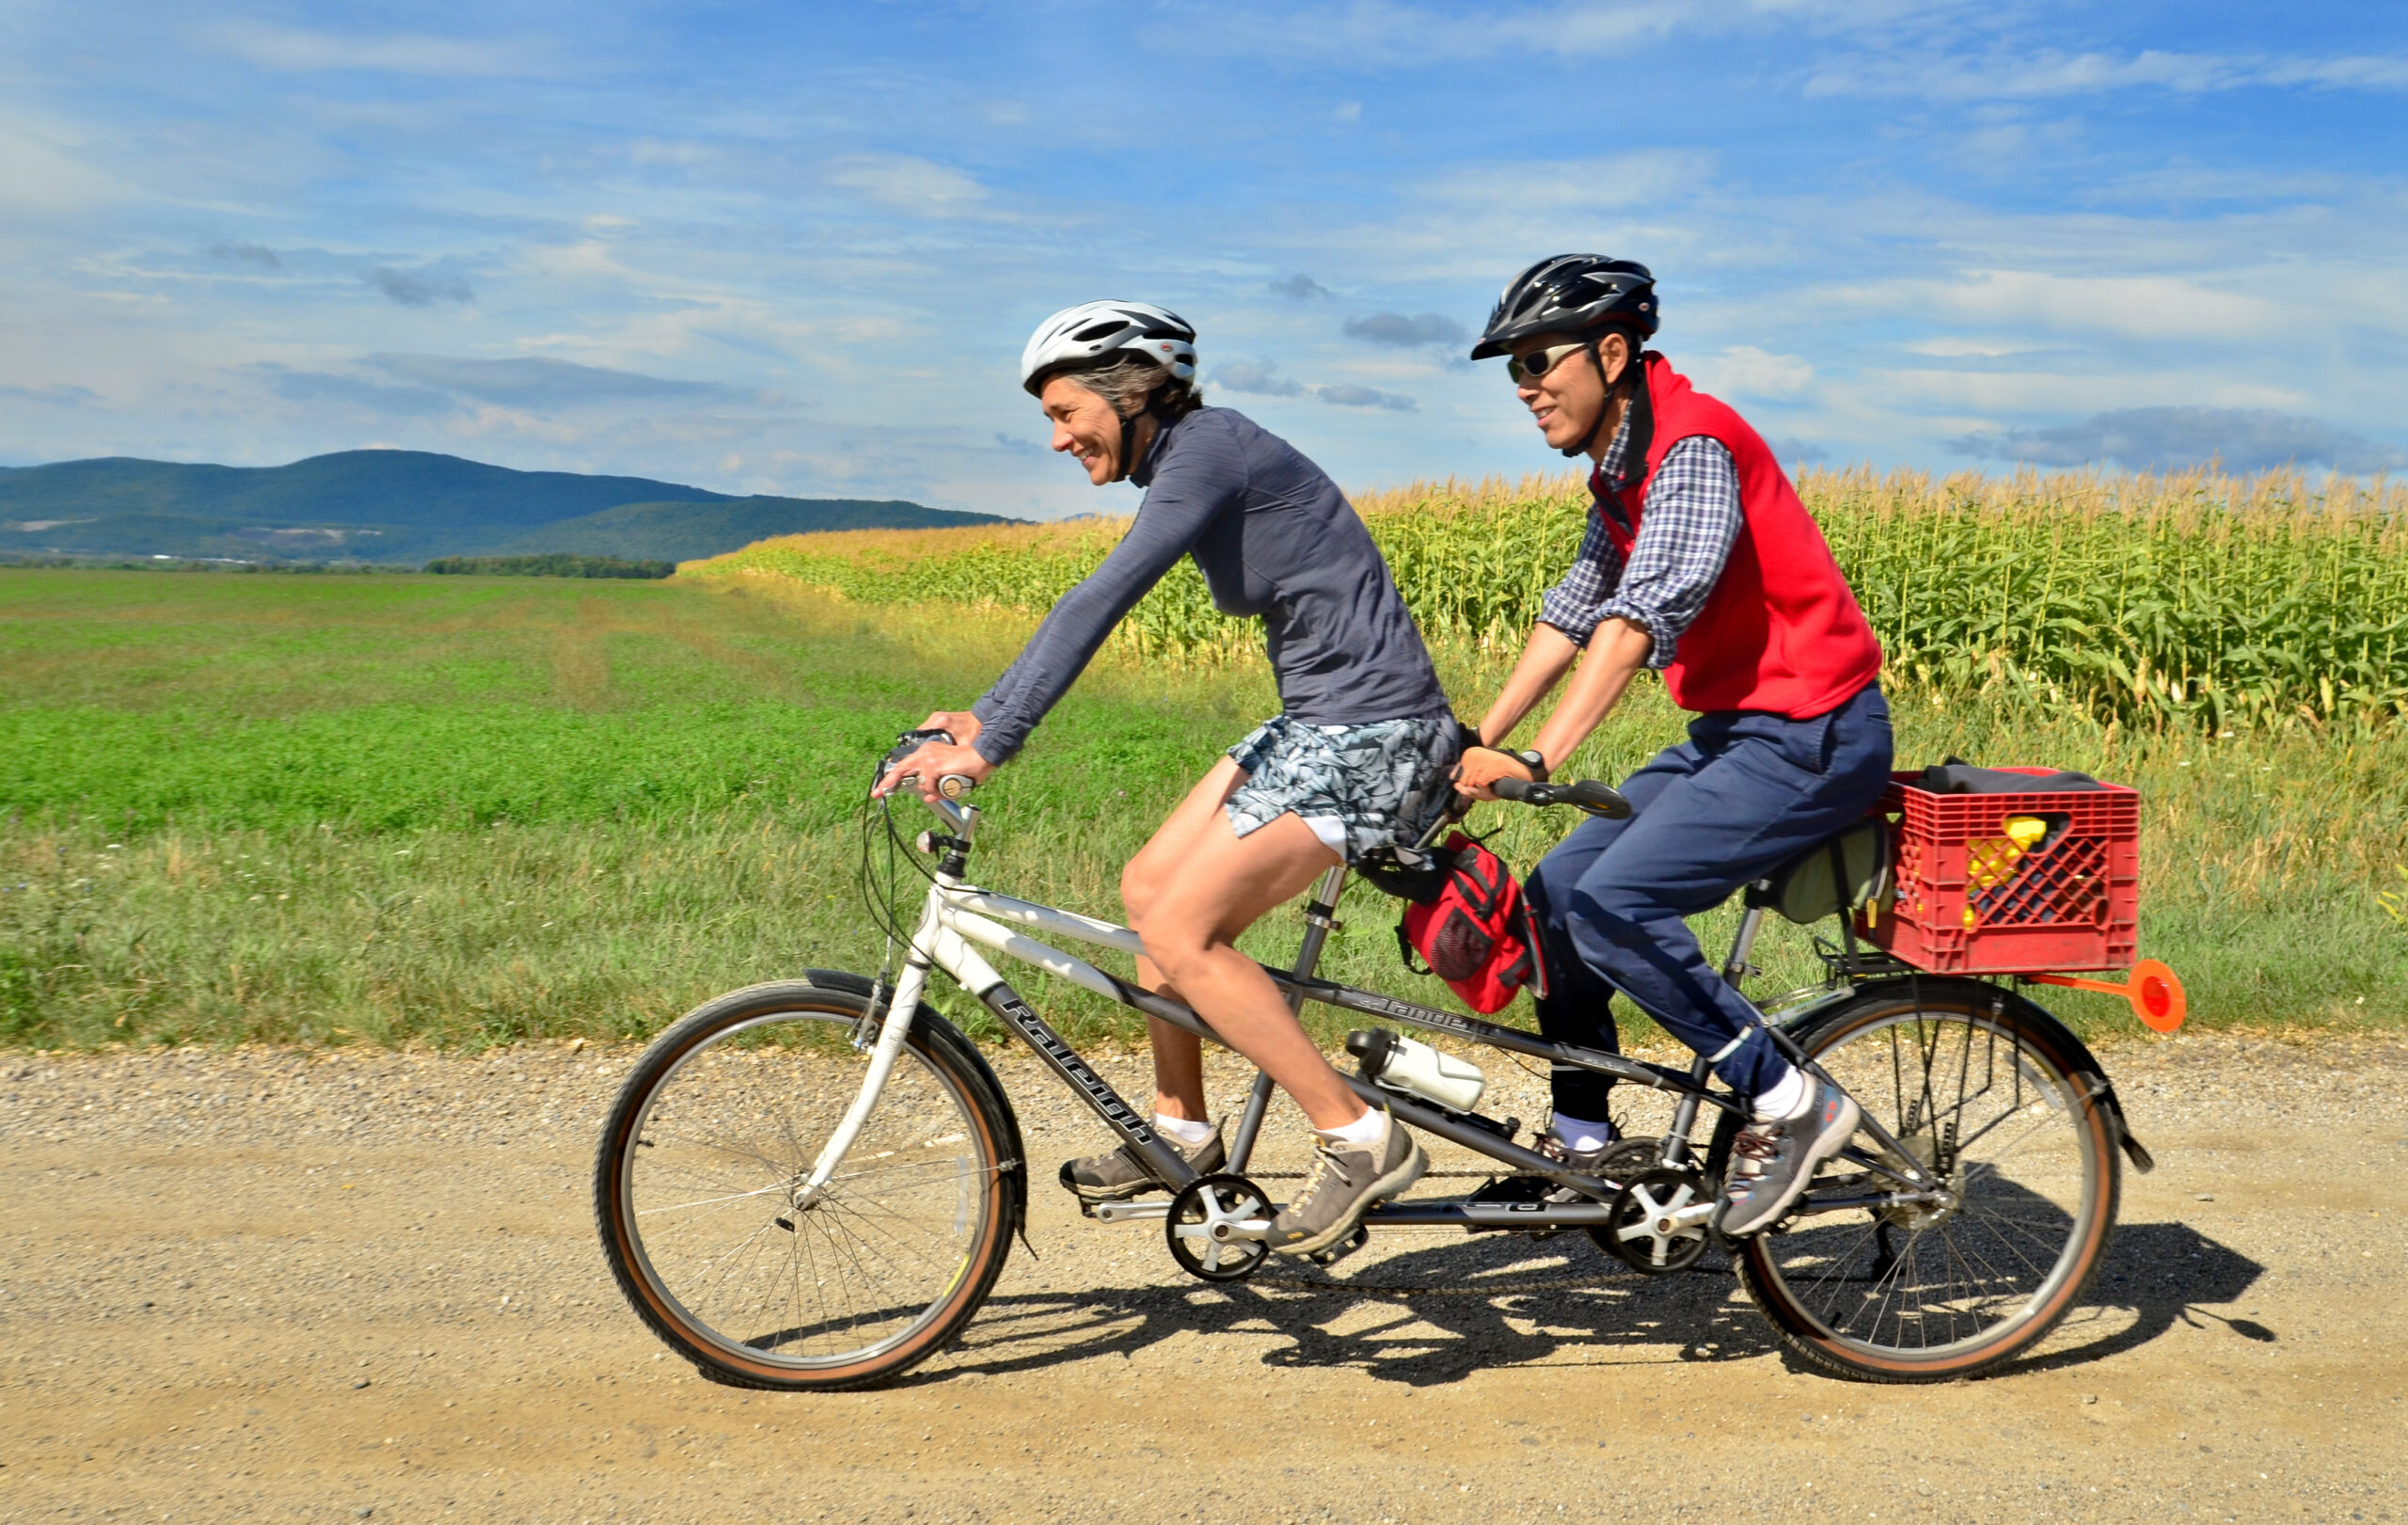 Tour de Farms Gearing Up for 10th Annual Ride August 6th Pre